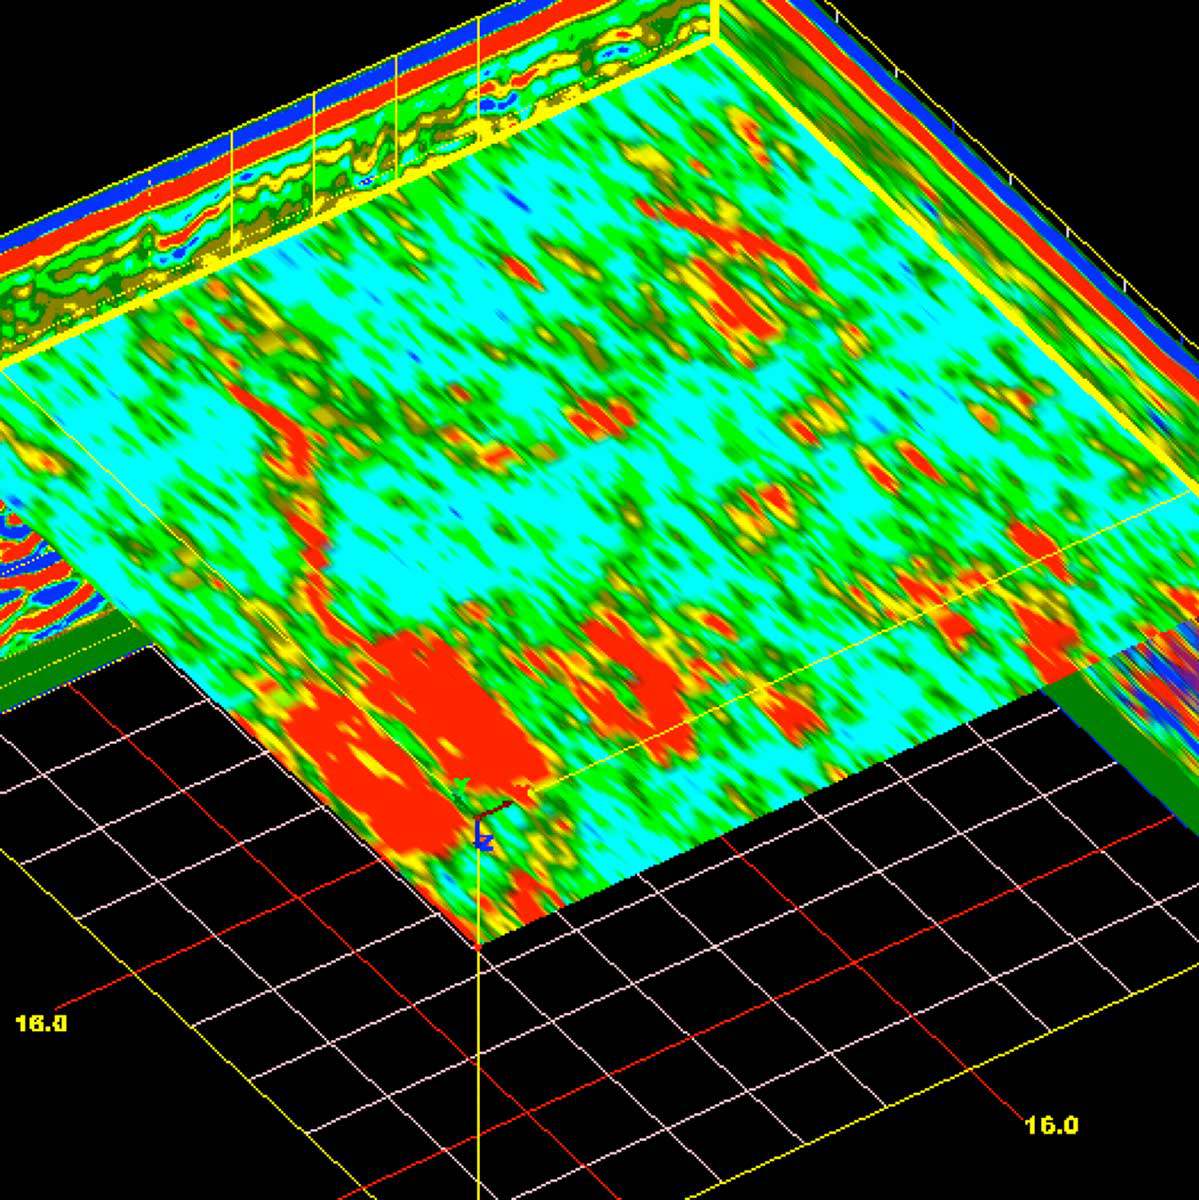 Figure A: Preliminary ground penetrating radar results showing one section of the grid system at the Henson Family Cemetery. The red areas denote two burials that are confirmed by the presence of accompanying headstones.